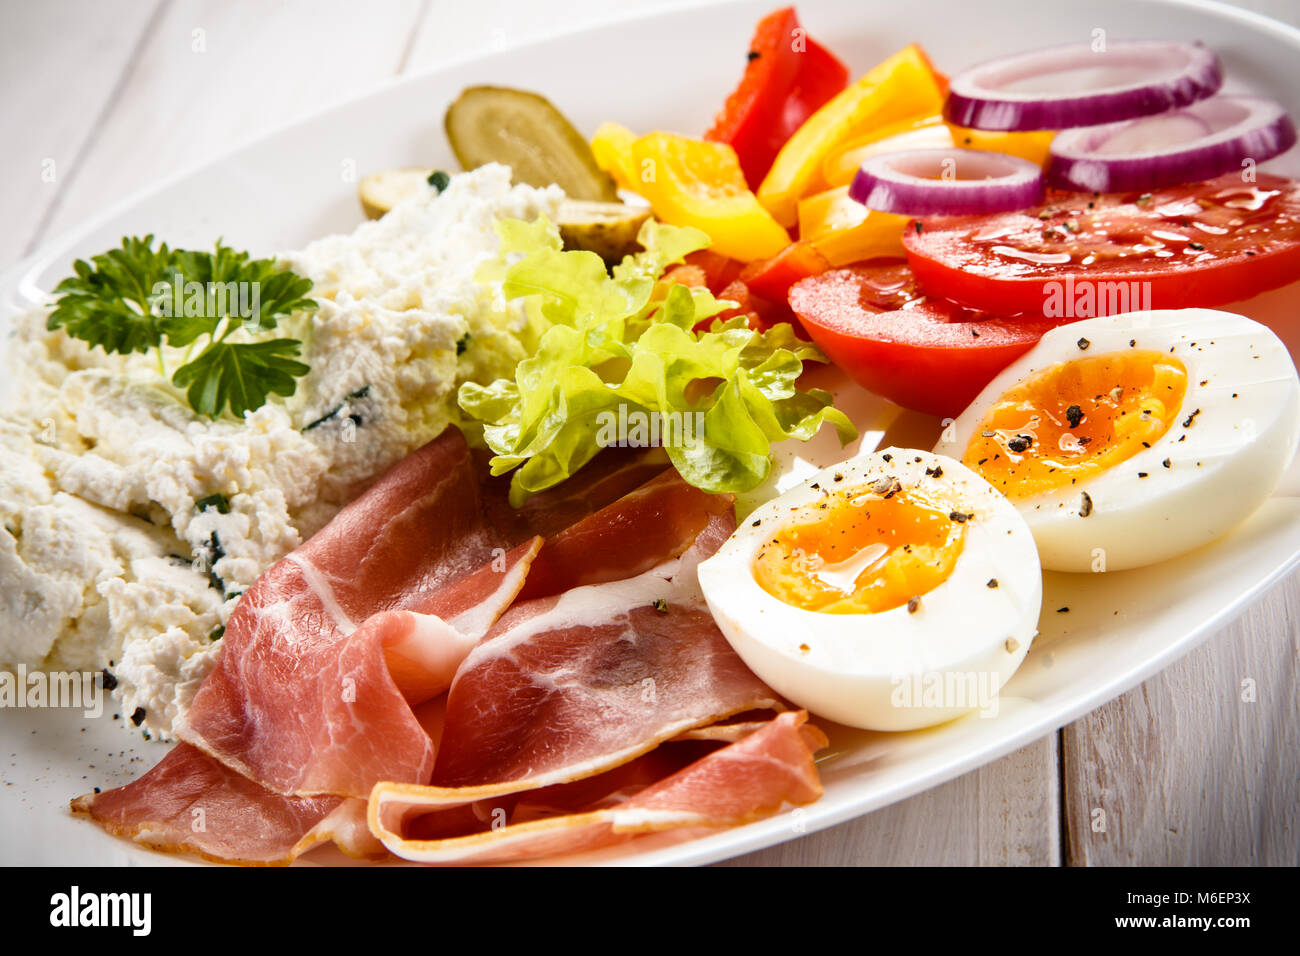 Breakfast - boiled egg, bacon, cottage cheese and vegetables Stock Photo